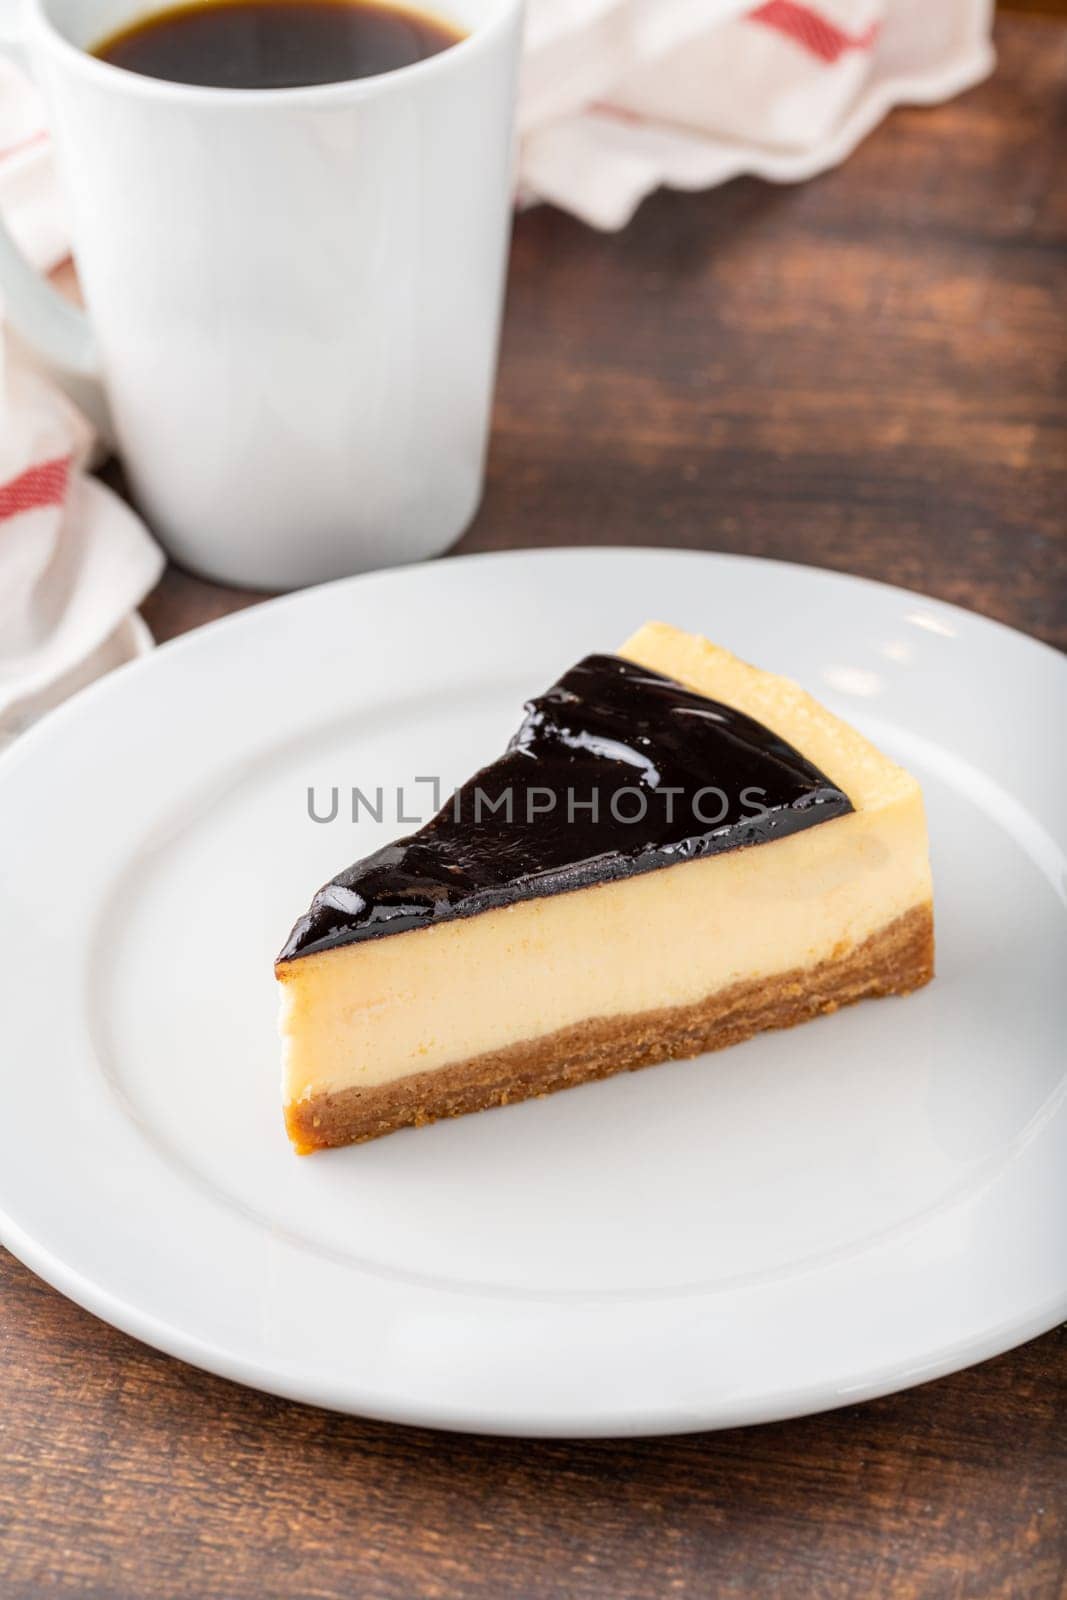 Chocolate cheesecake with brewing coffee on wooden table